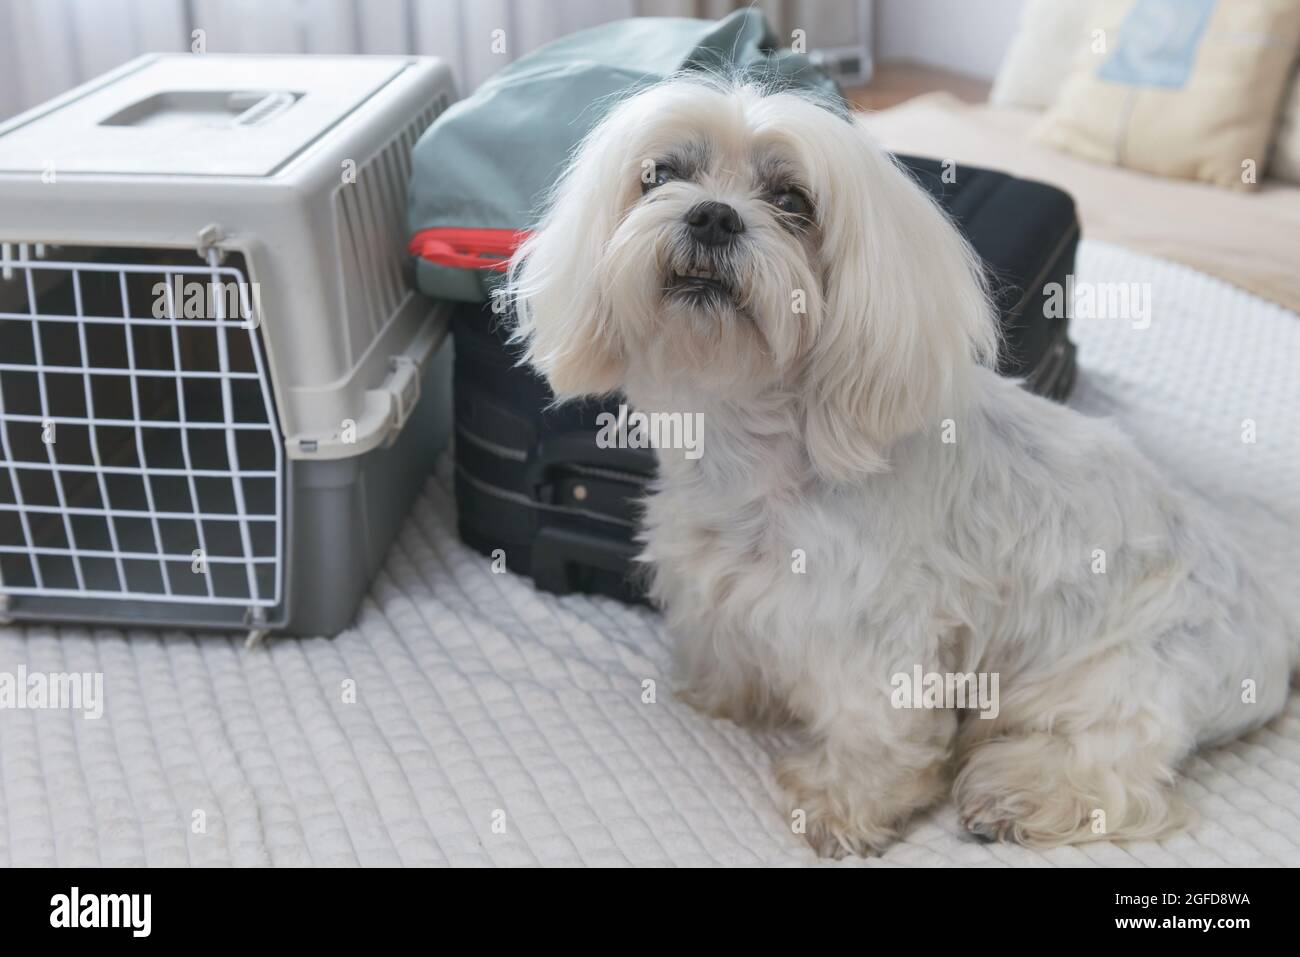 Small dog maltese sitting near carrier and bags waiting for a trip Stock Photo